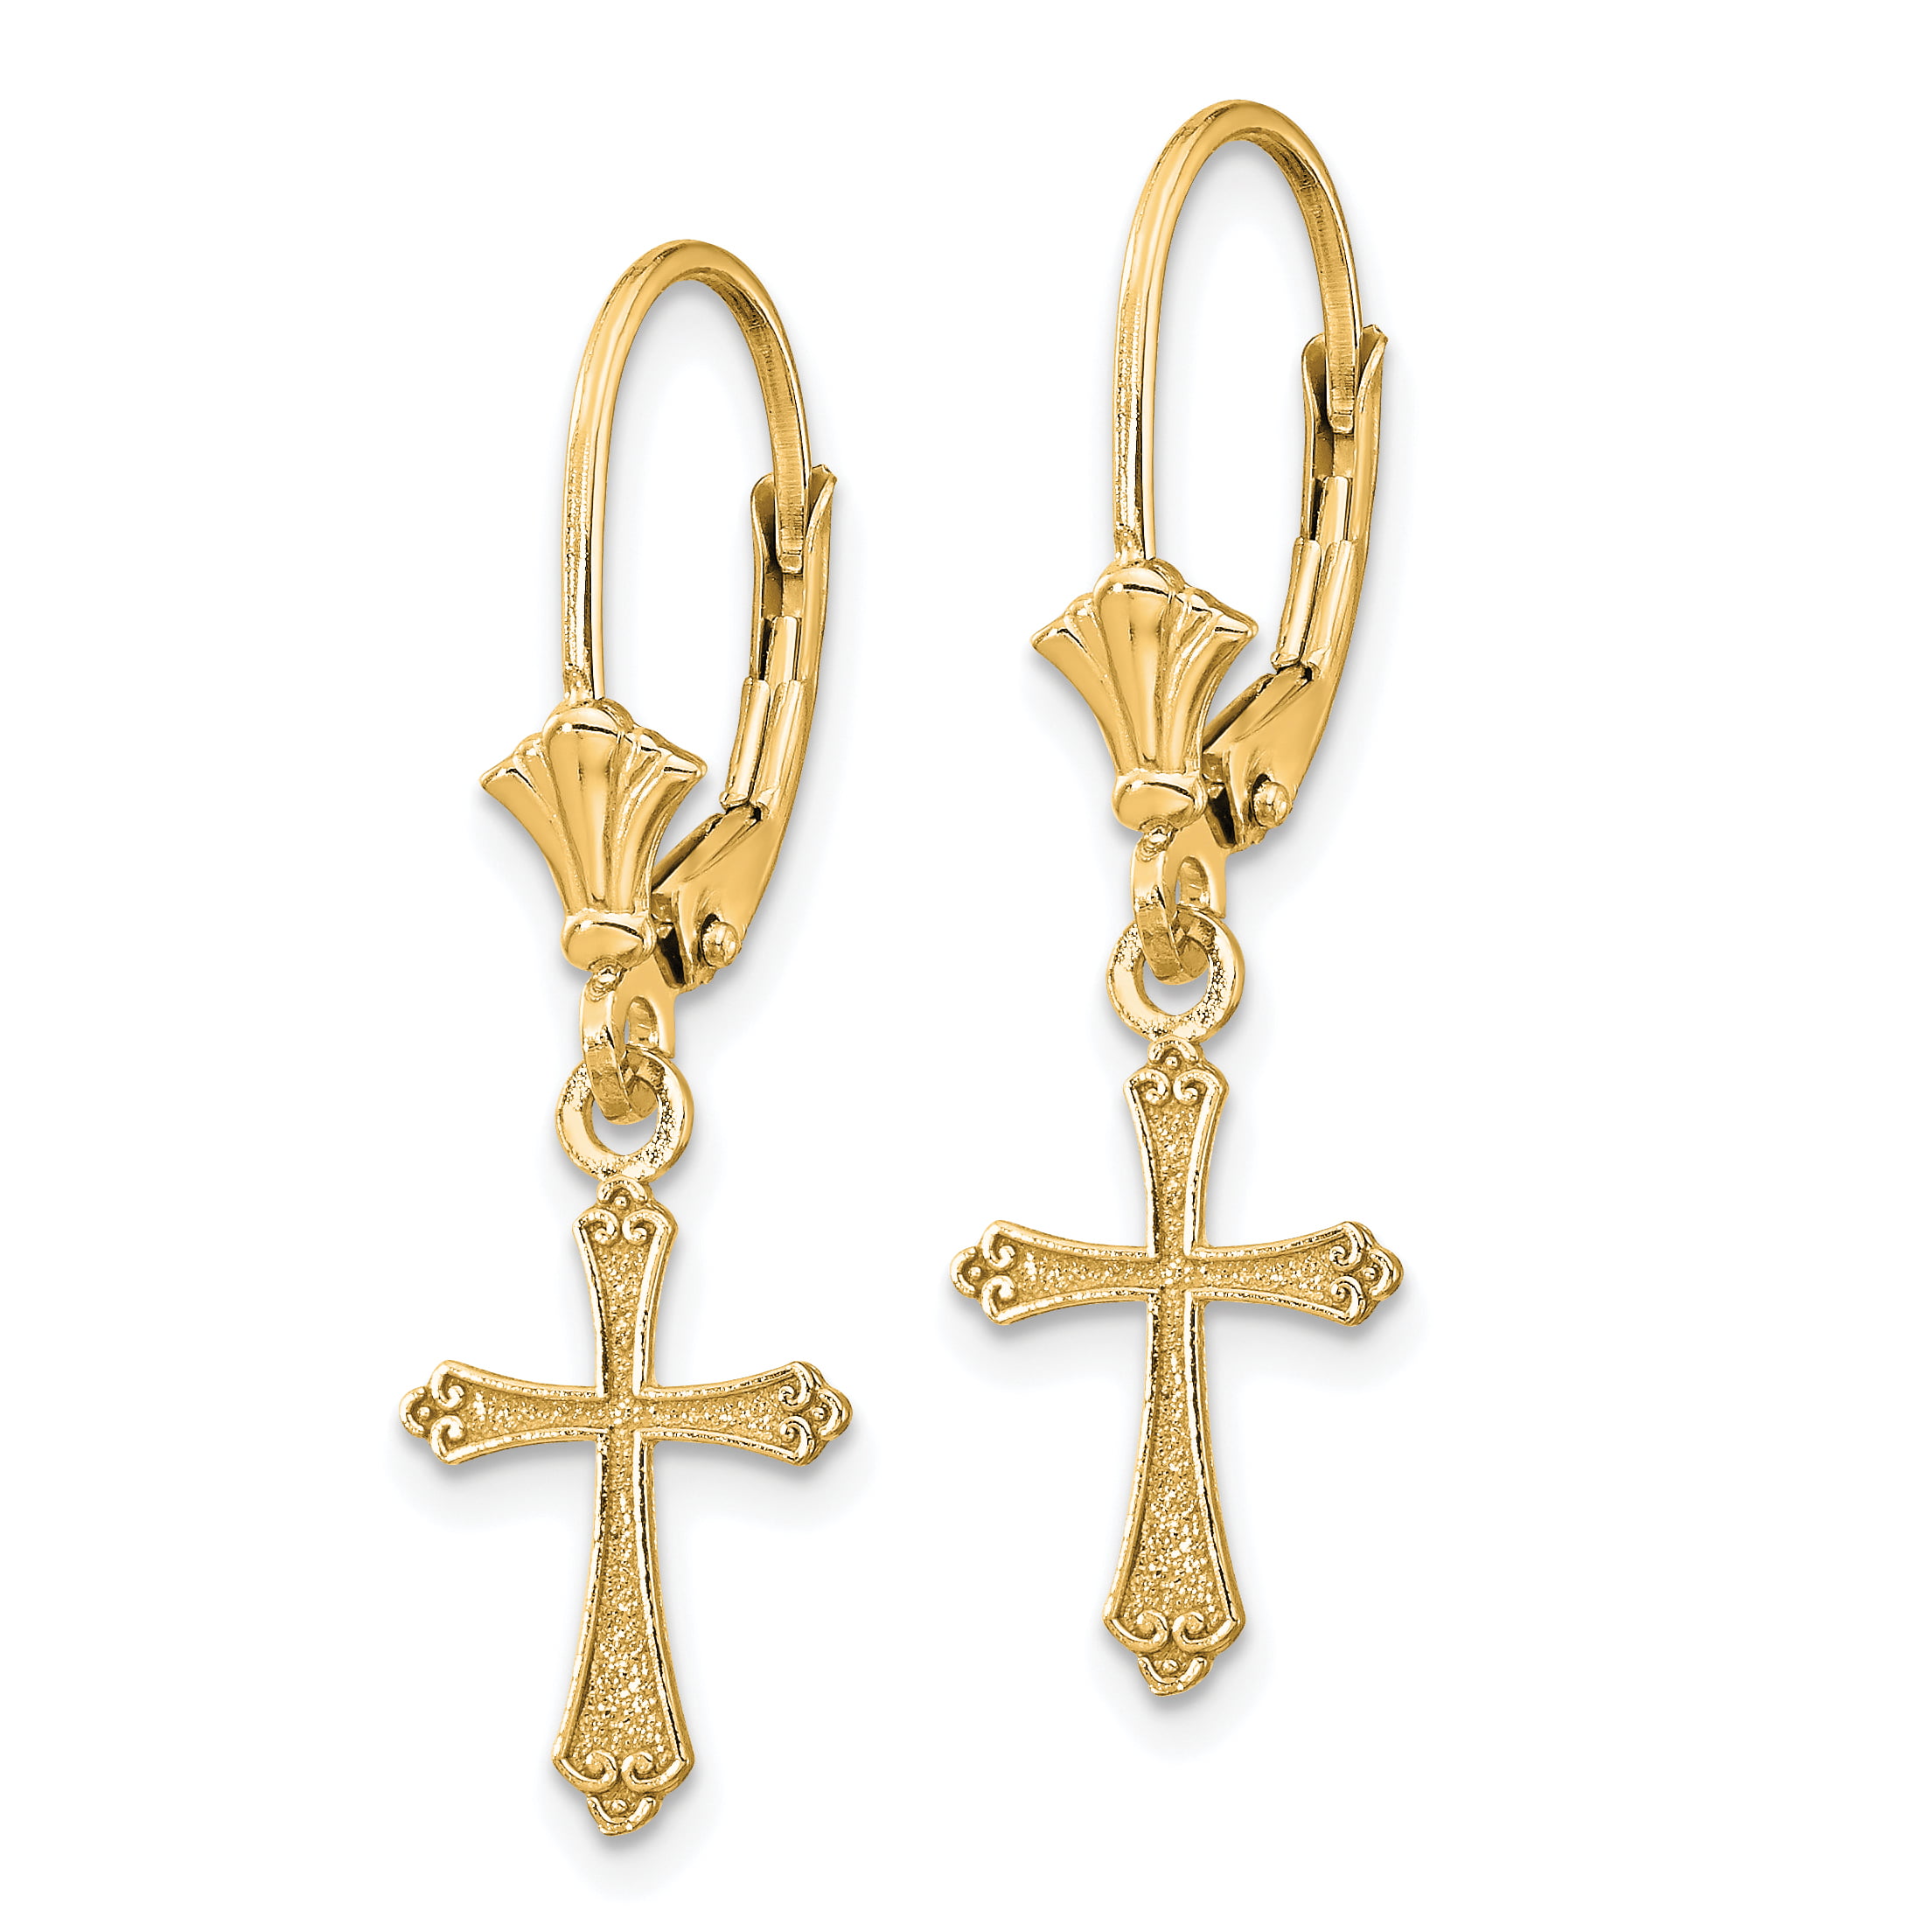 14K Yellow Gold Mini Cross with Scroll Tips Dangle Lever back Earrings MSRP $202